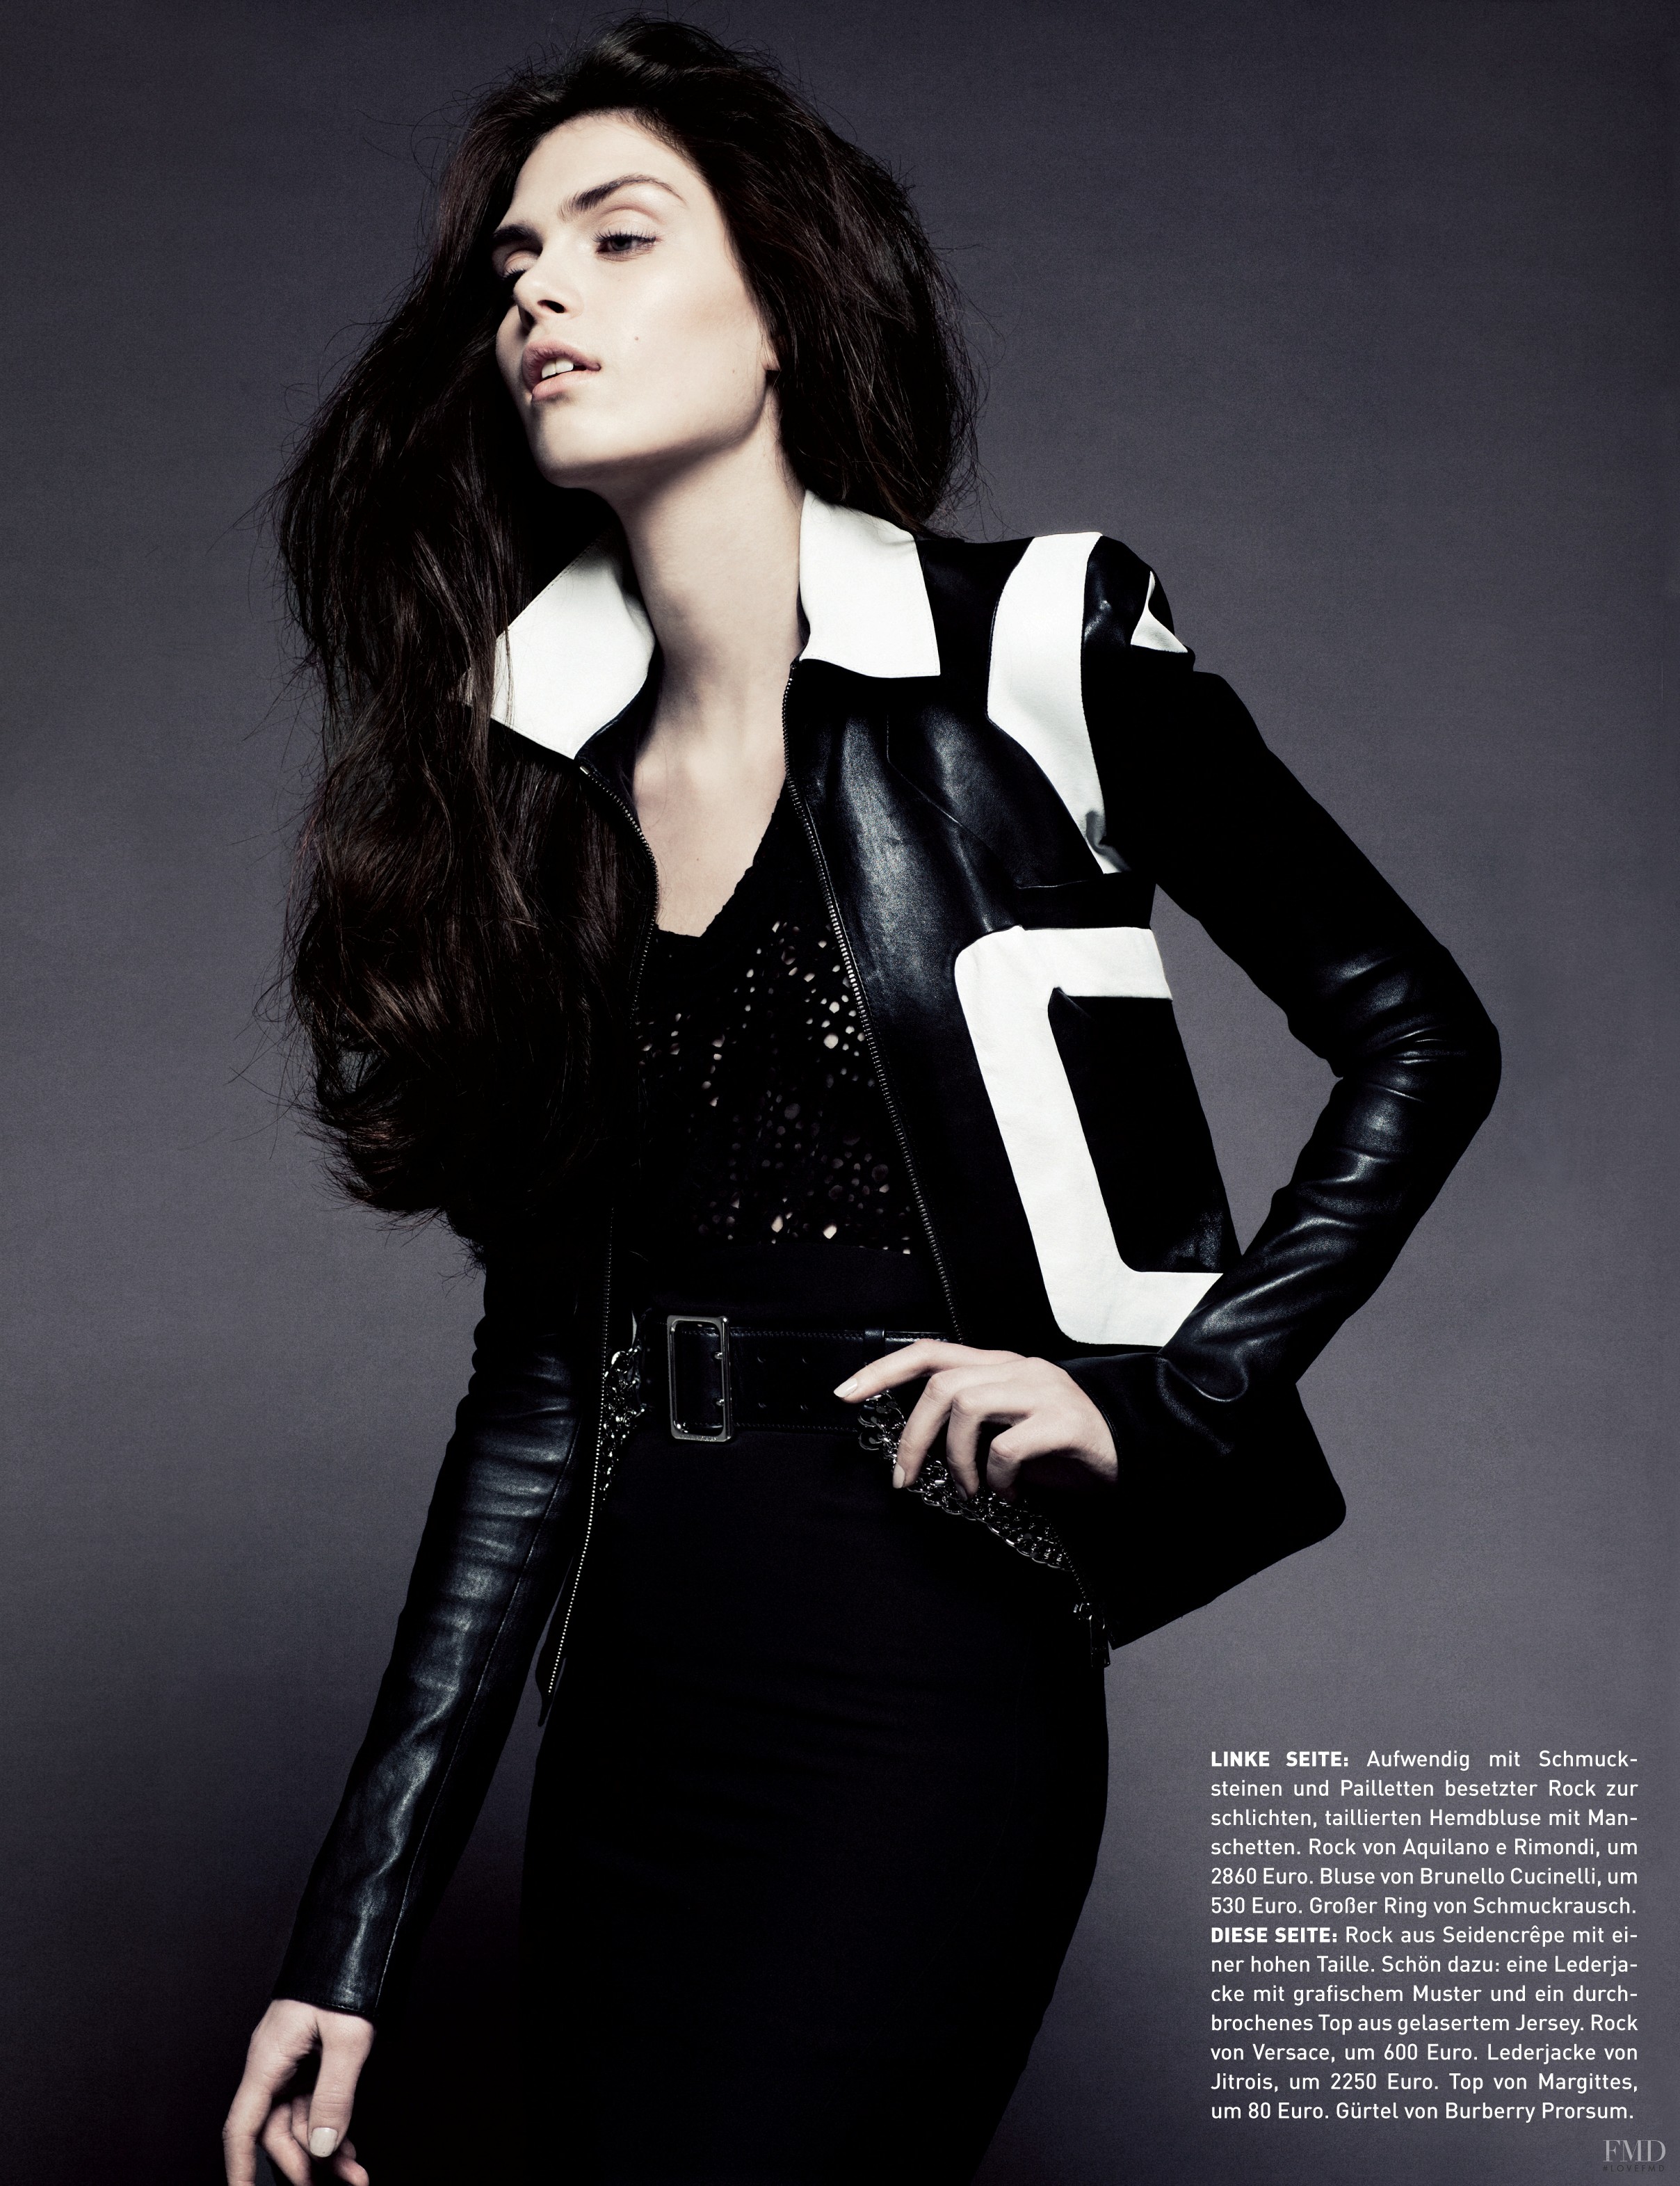 Rock & Top in Madame with Maria Palm wearing Versace,Burberry Prorsum ...